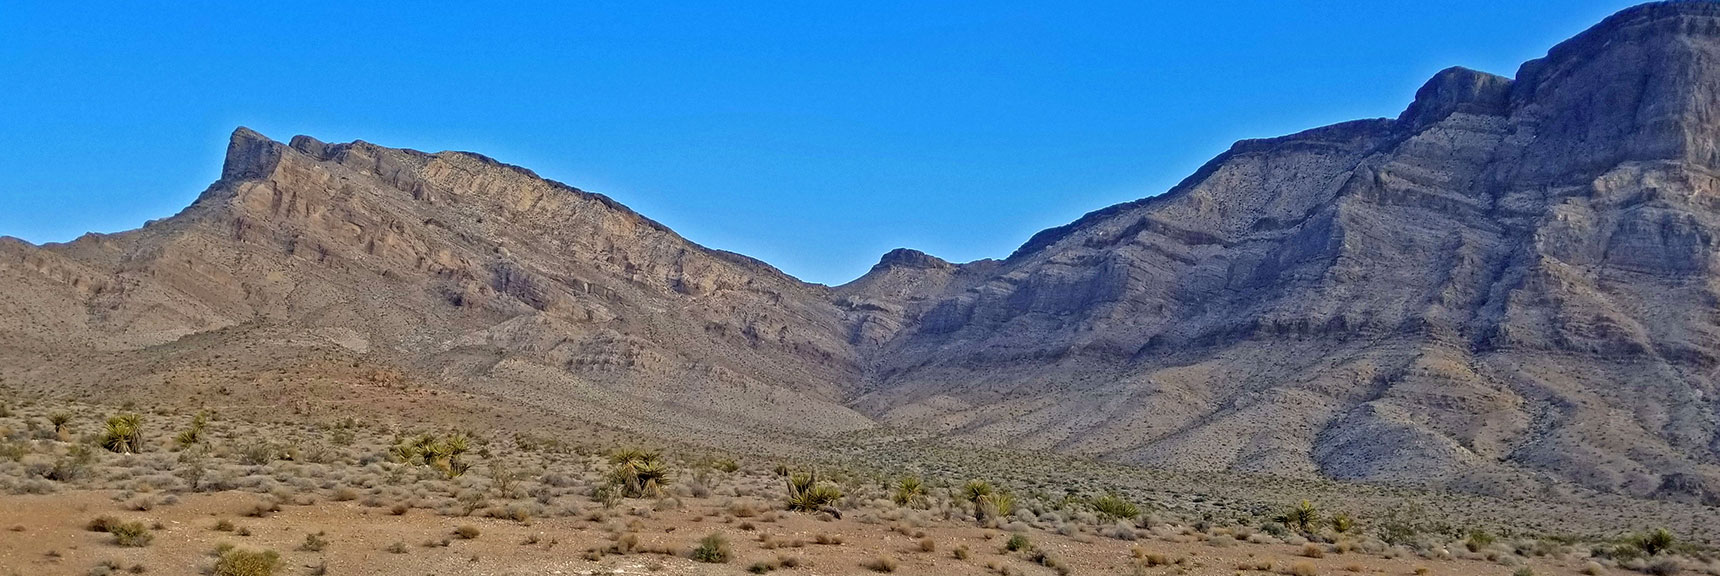 Saddle Gap in Ridge to the East Promises to Lead to Ridge Summit | Little Red Rock Las Vegas, Nevada, Near La Madre Mountains Wilderness